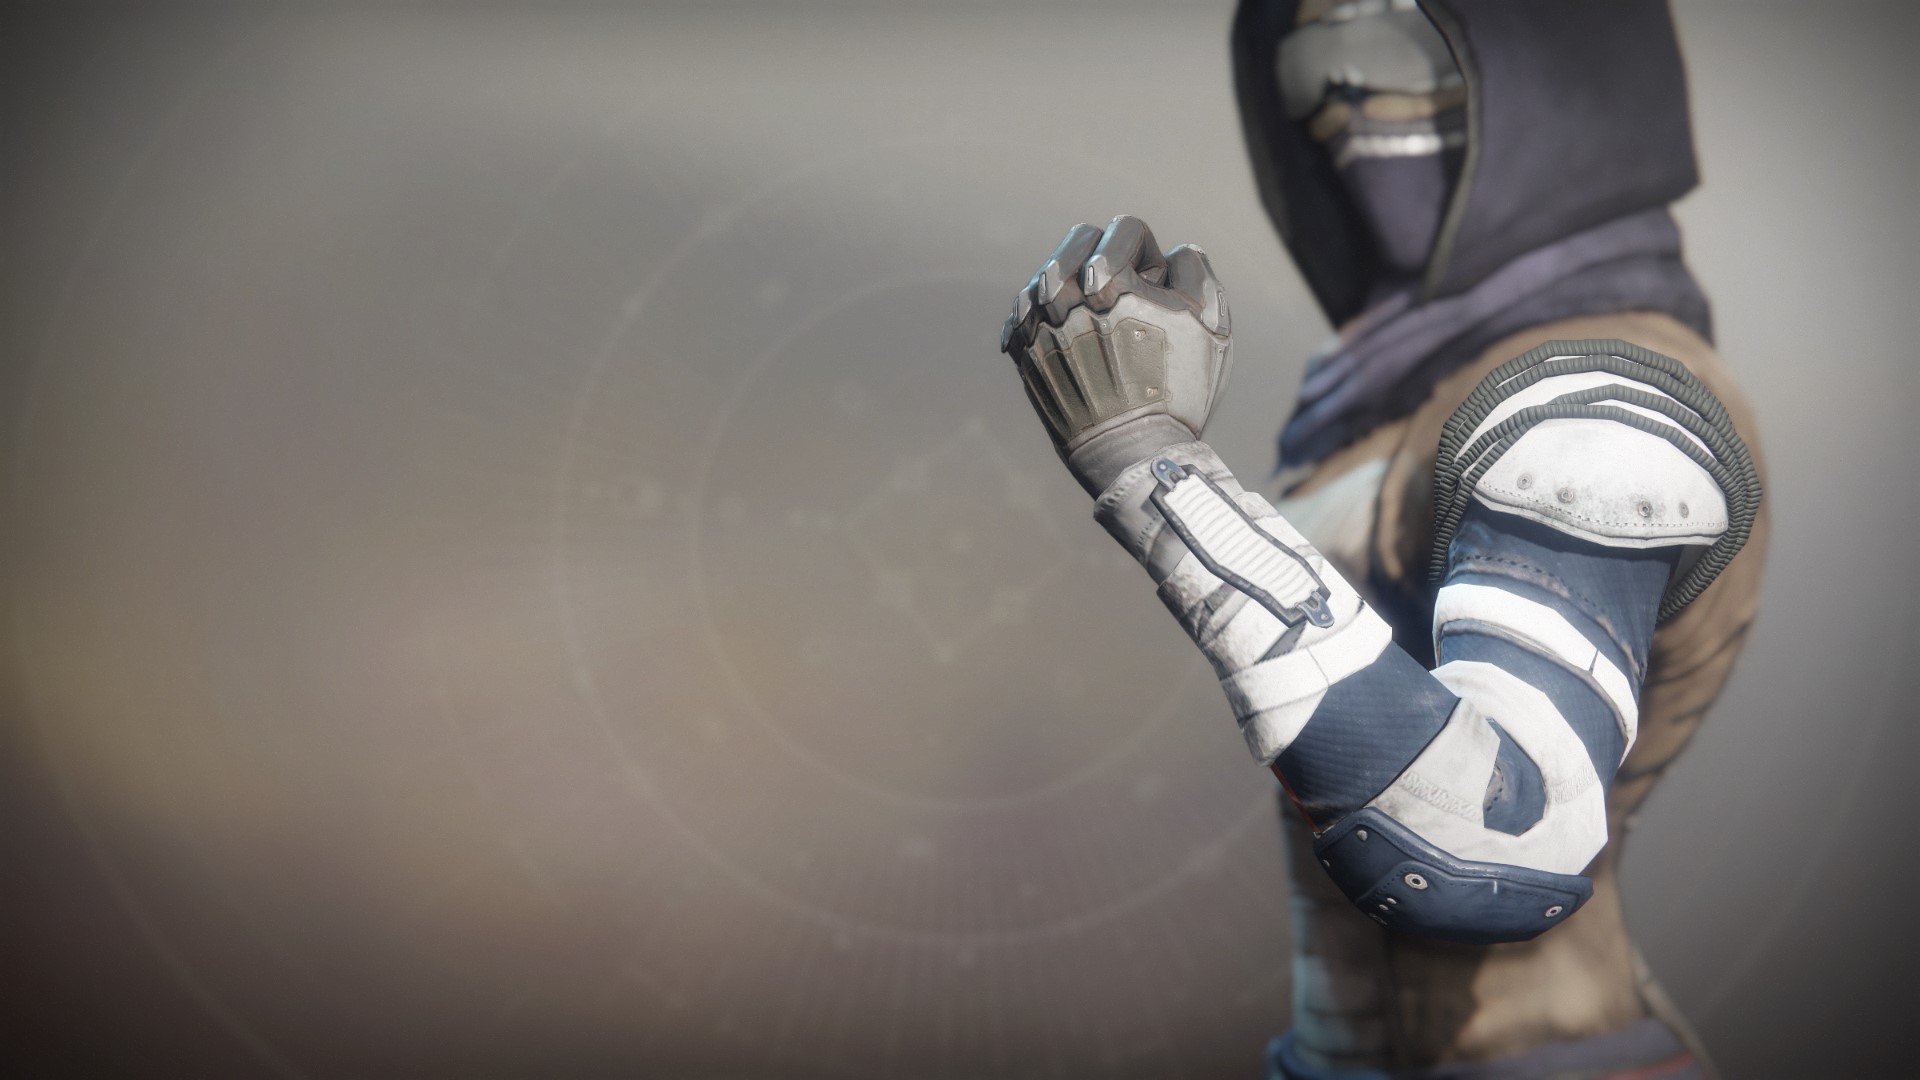 An in-game render of the Steadfast Hunter Ornament.